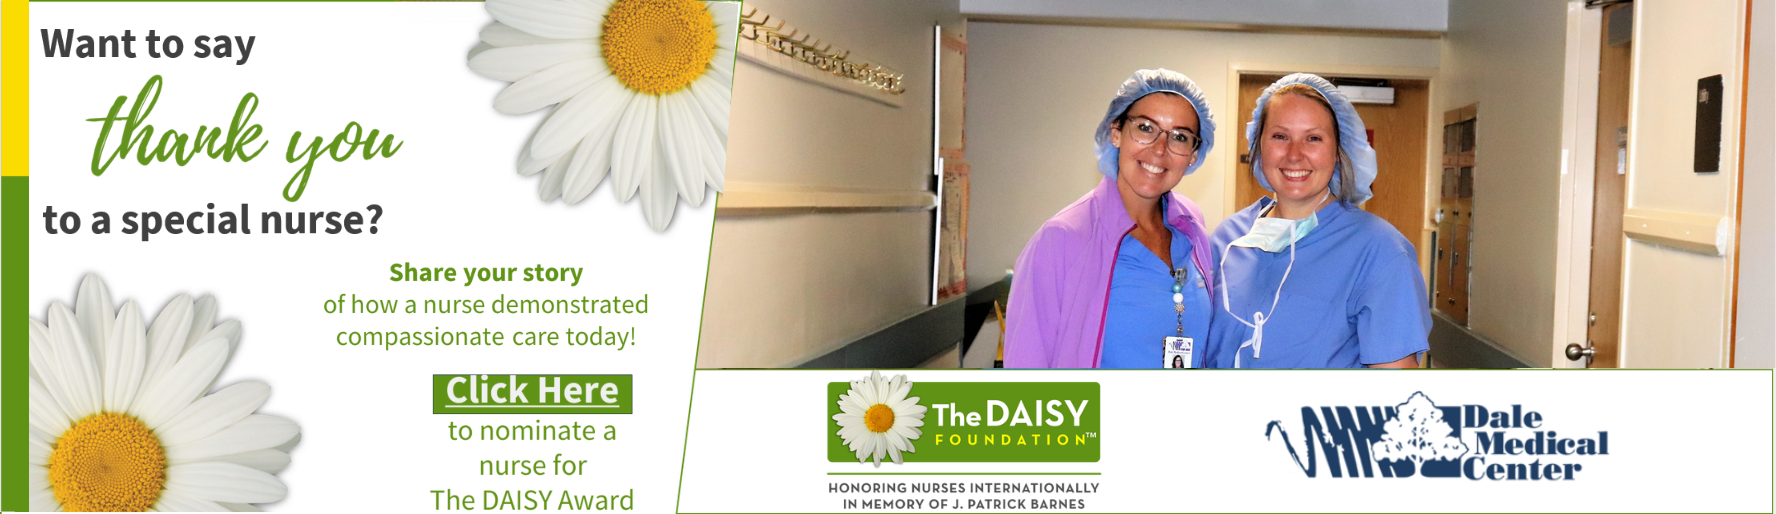 Want to say Thank You to a special Nurse? 

Share your story of how a nurse demonstrated compassionate care today

Click Here (link)
to nominate a Nurse for The DAISY award

The Daisy Foundation 
HONORING NURSES, INTERNATIONALLY IN MEMORY OF J. Patrick Barnes

DALE MEDICIAL CENTER